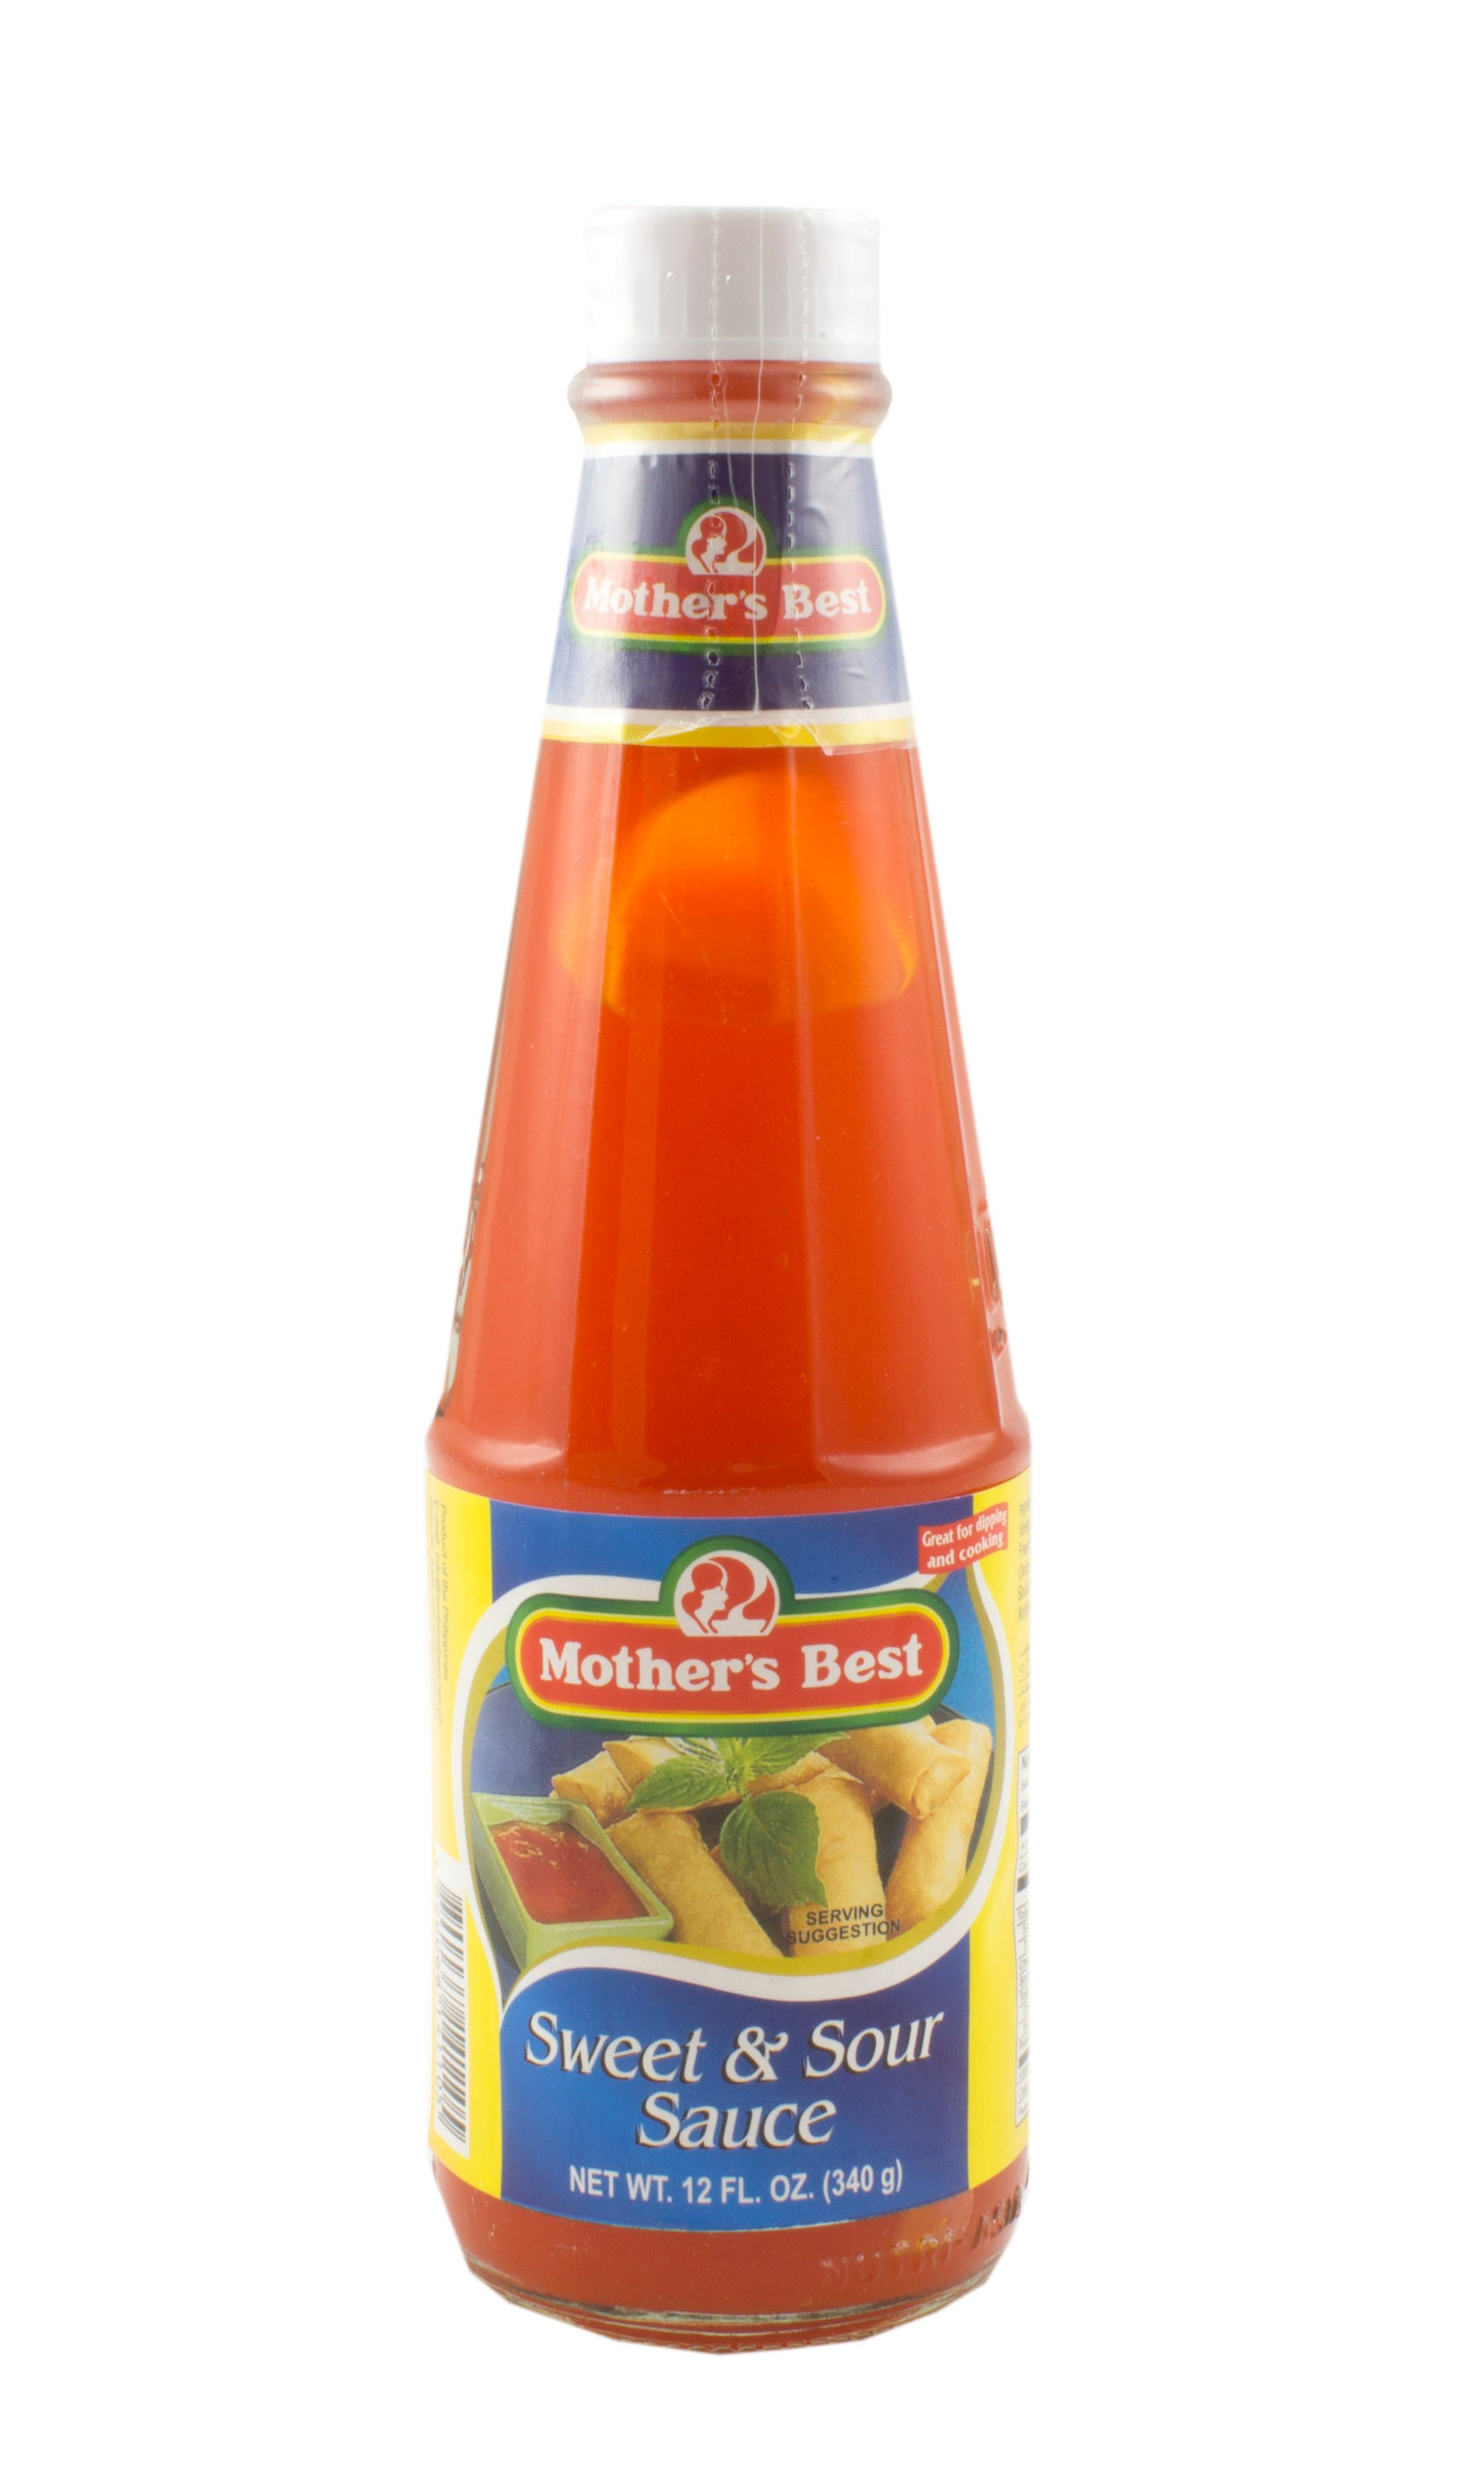 The Best Sweet and Sour Sauce